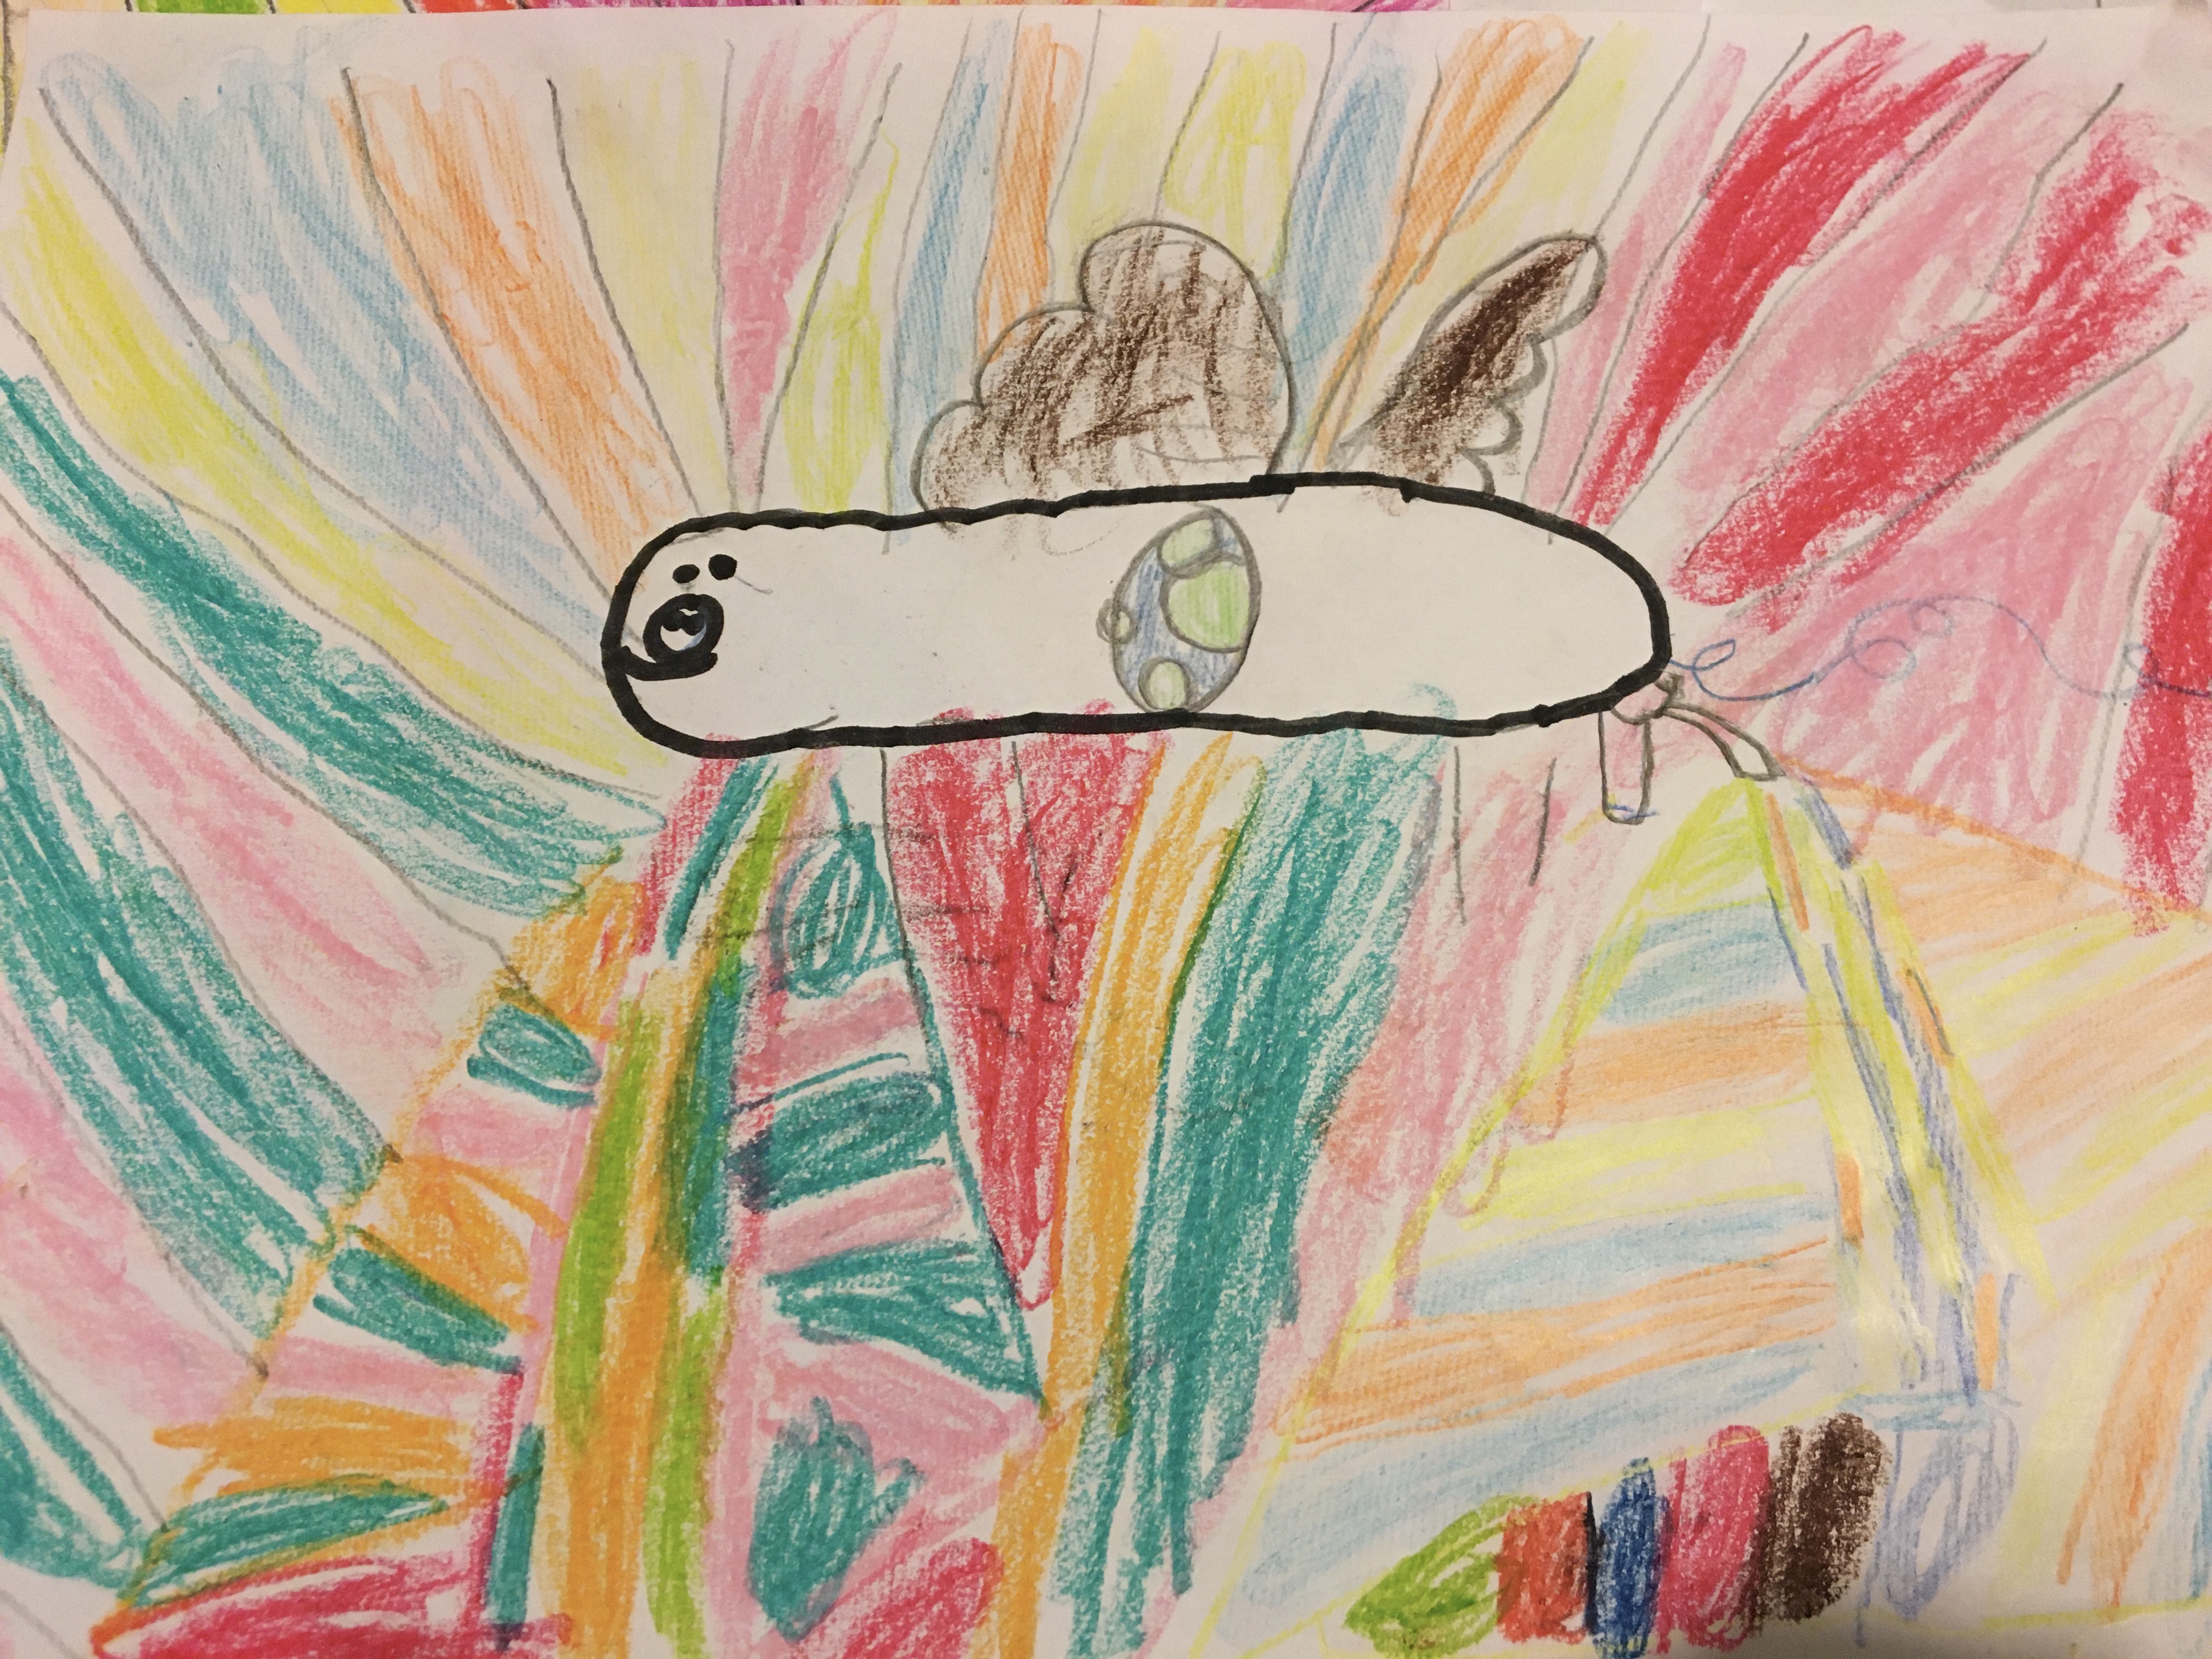 'The Flying Dog' by Tadhg (6) from Kilkenny